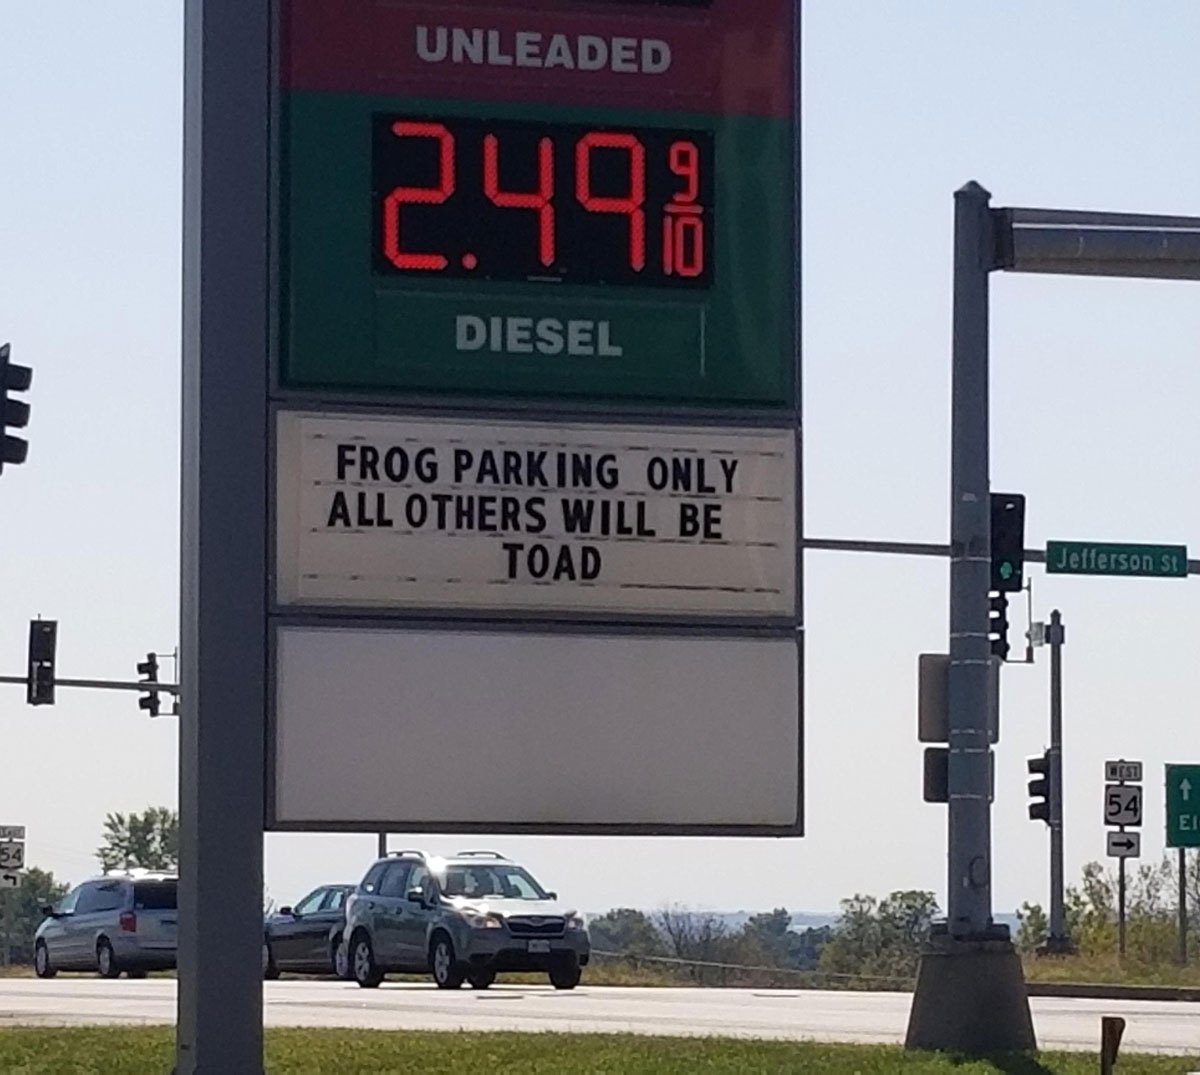 This sign at a gas station in Jefferson City, MO